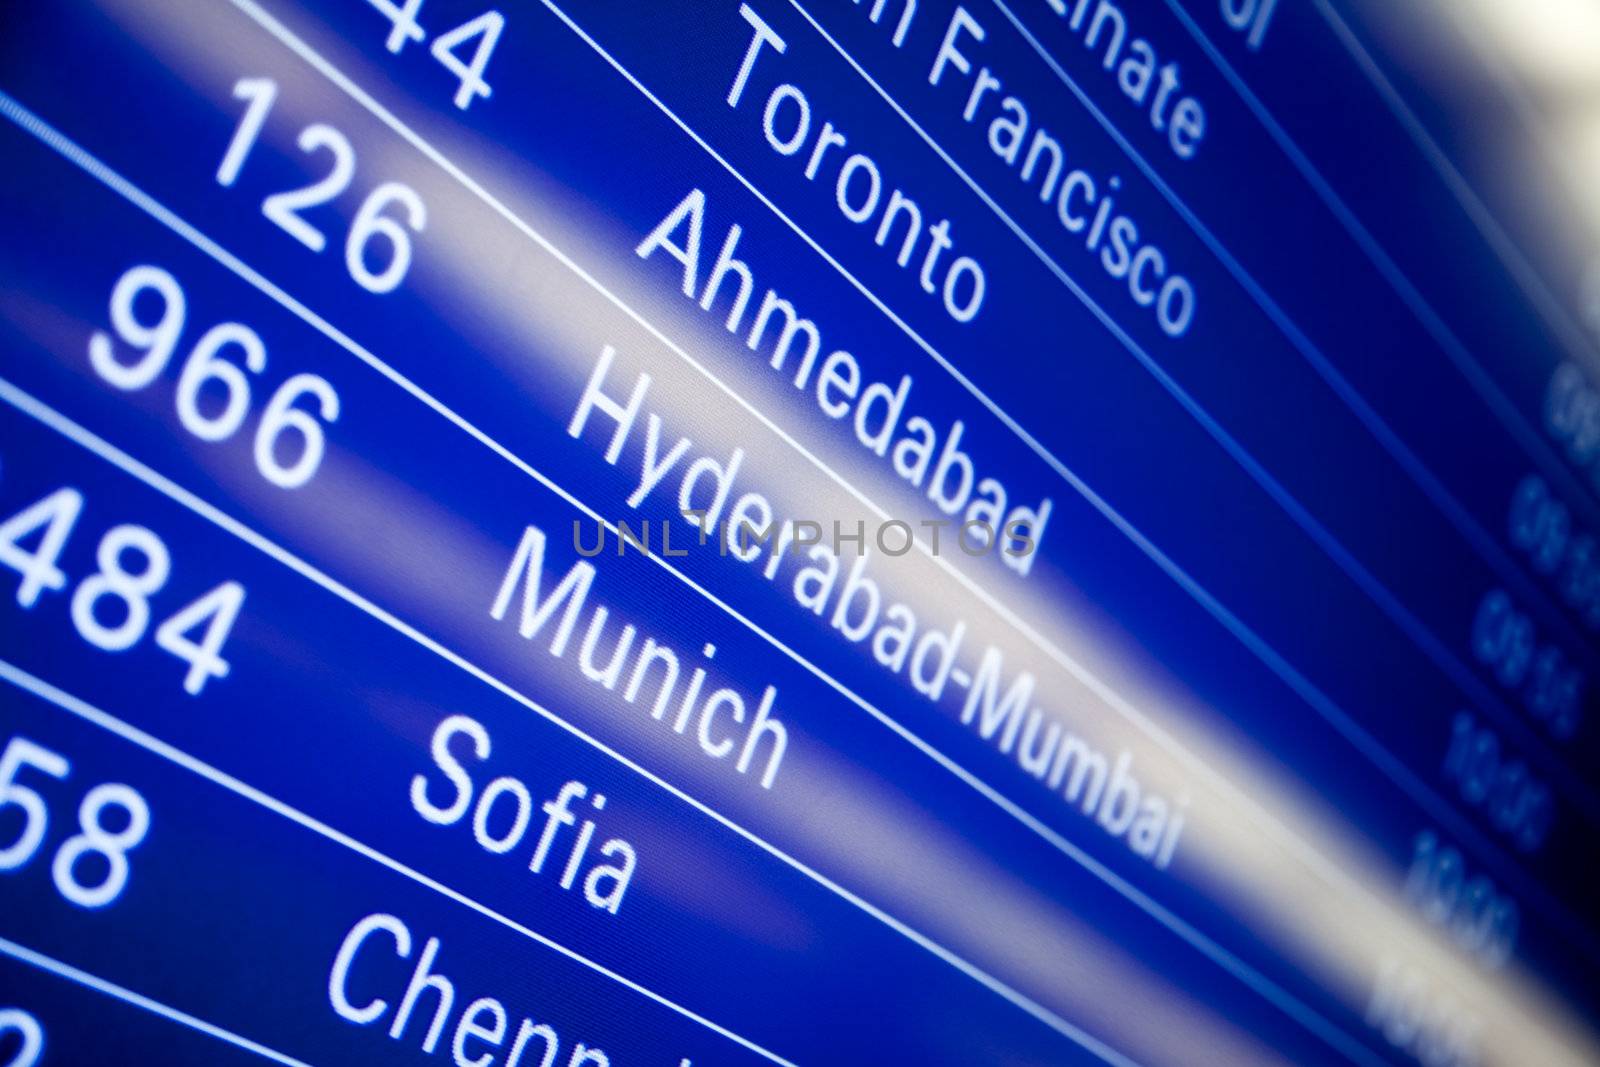 Blue flight information board in airport, selective focus